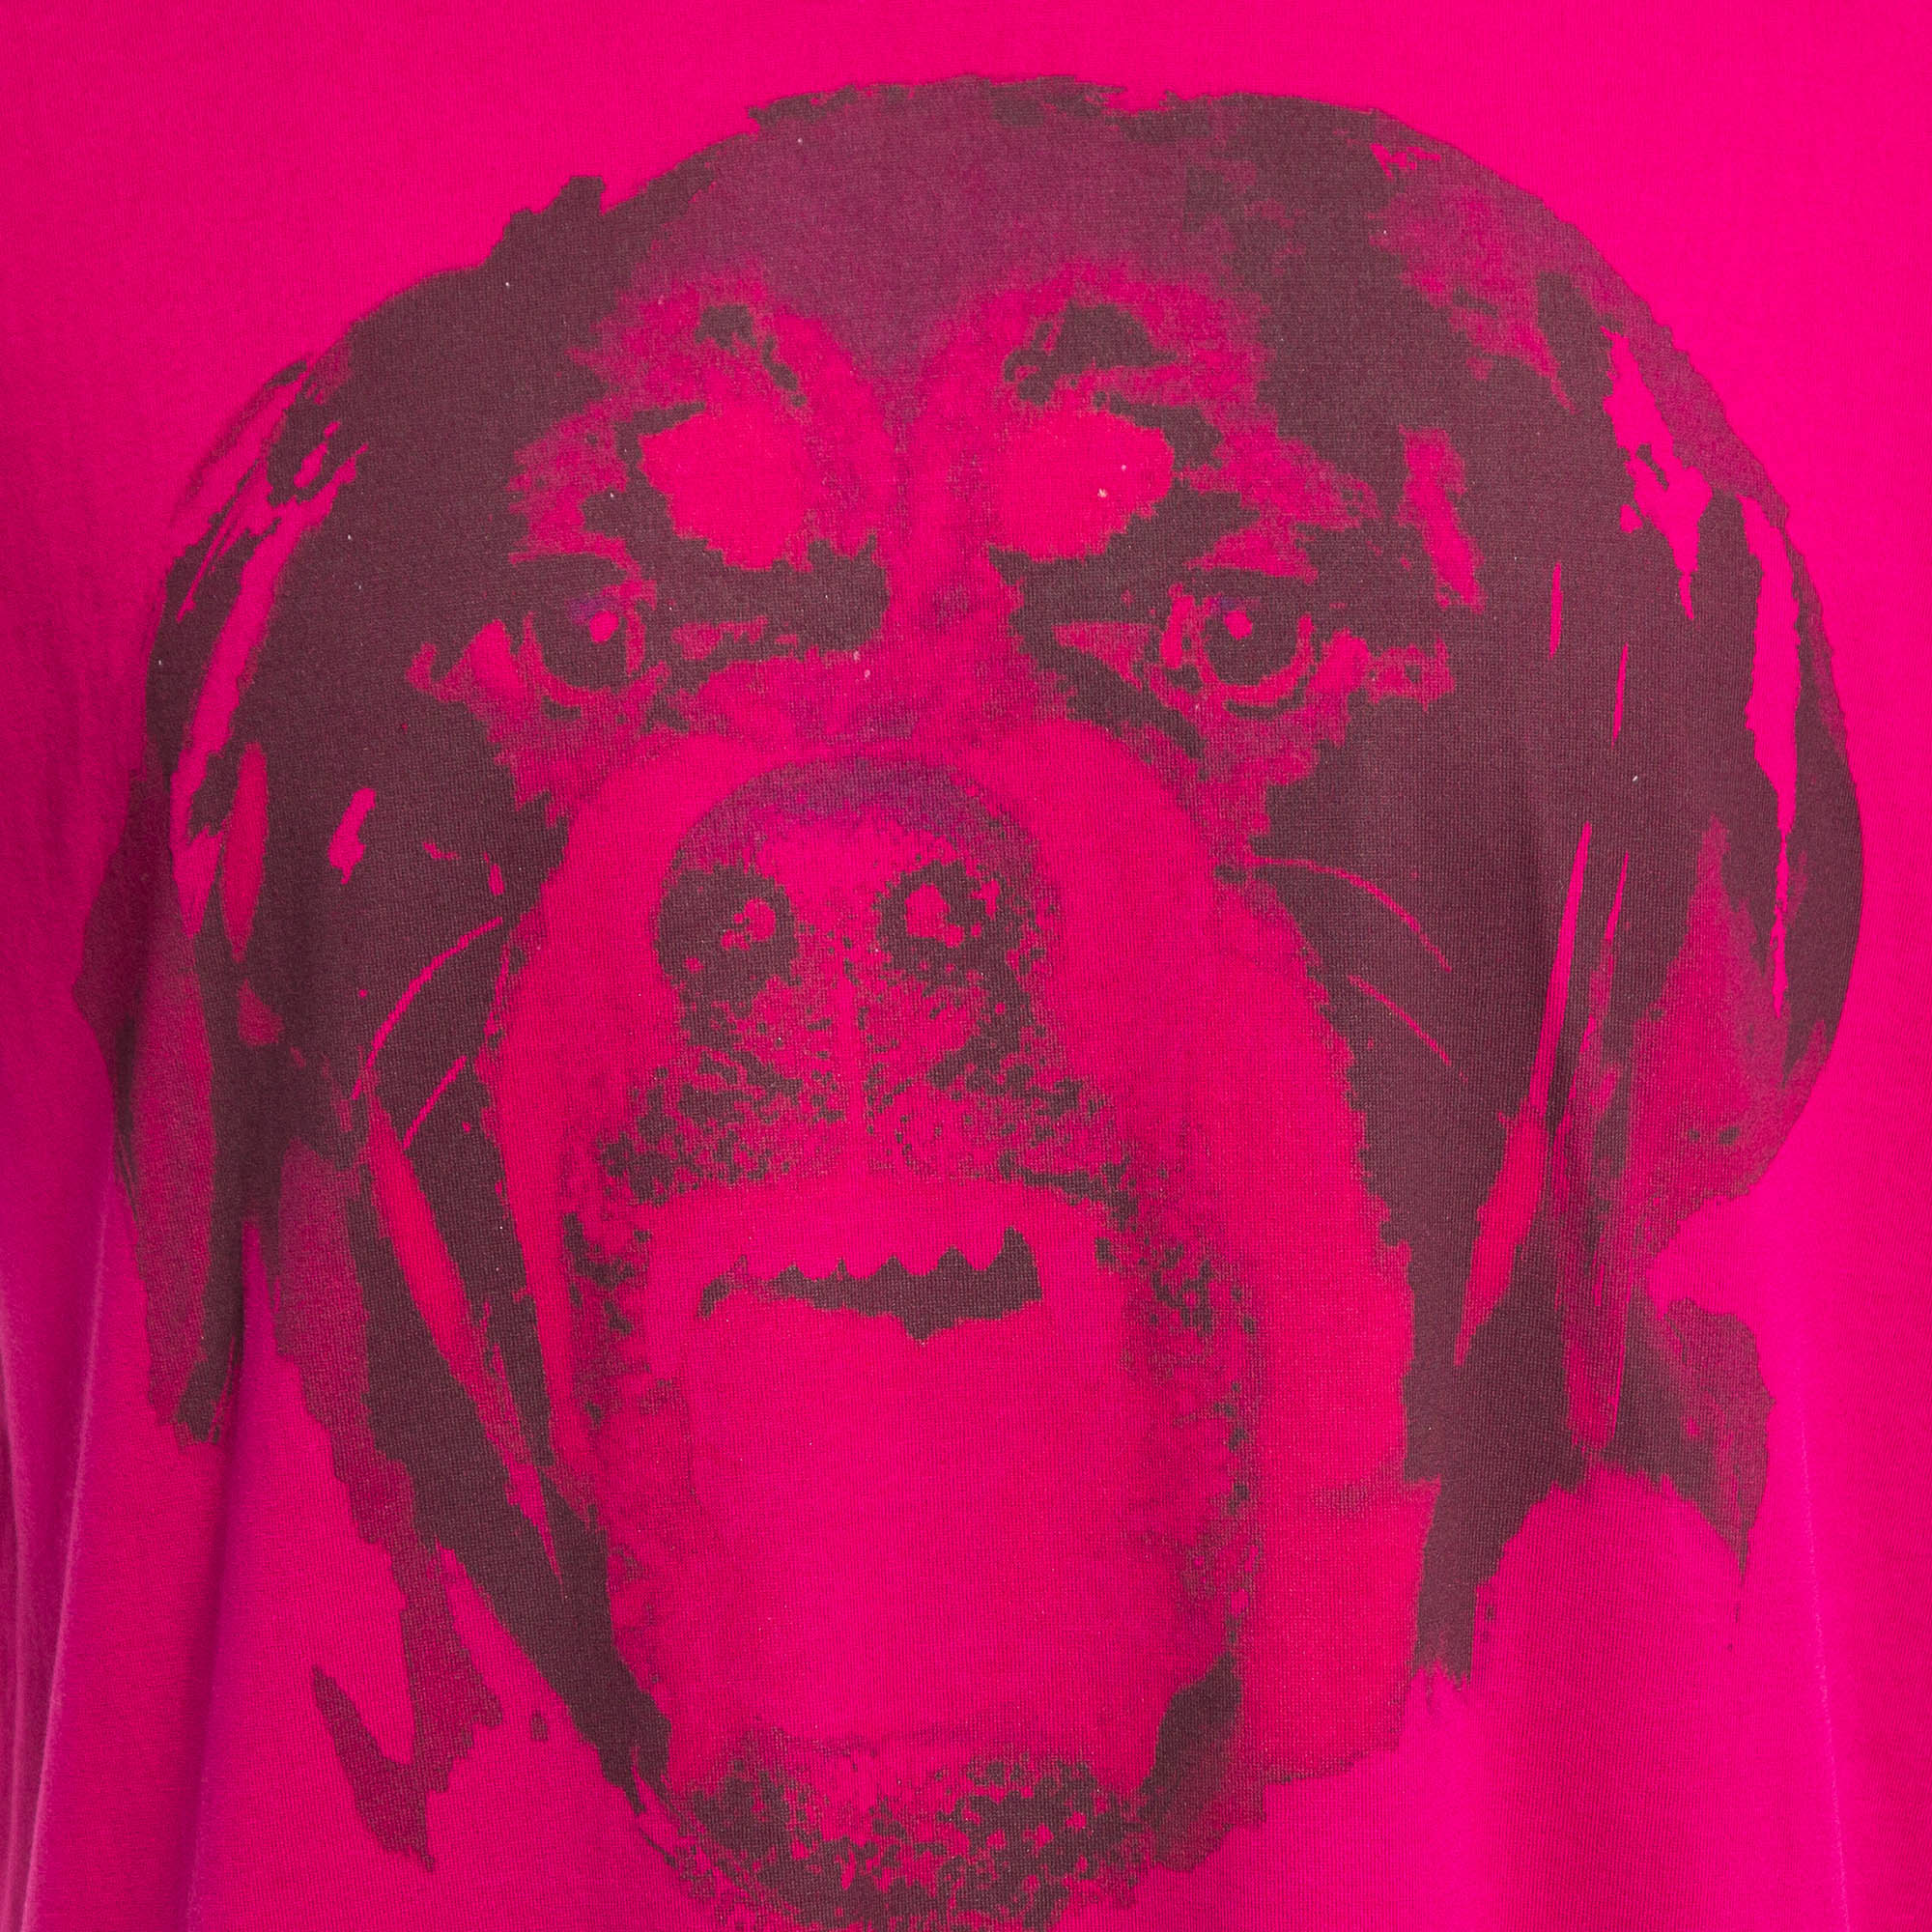 Givenchy Fuchsia Pink Printed Cotton Crew Neck T-Shirt S